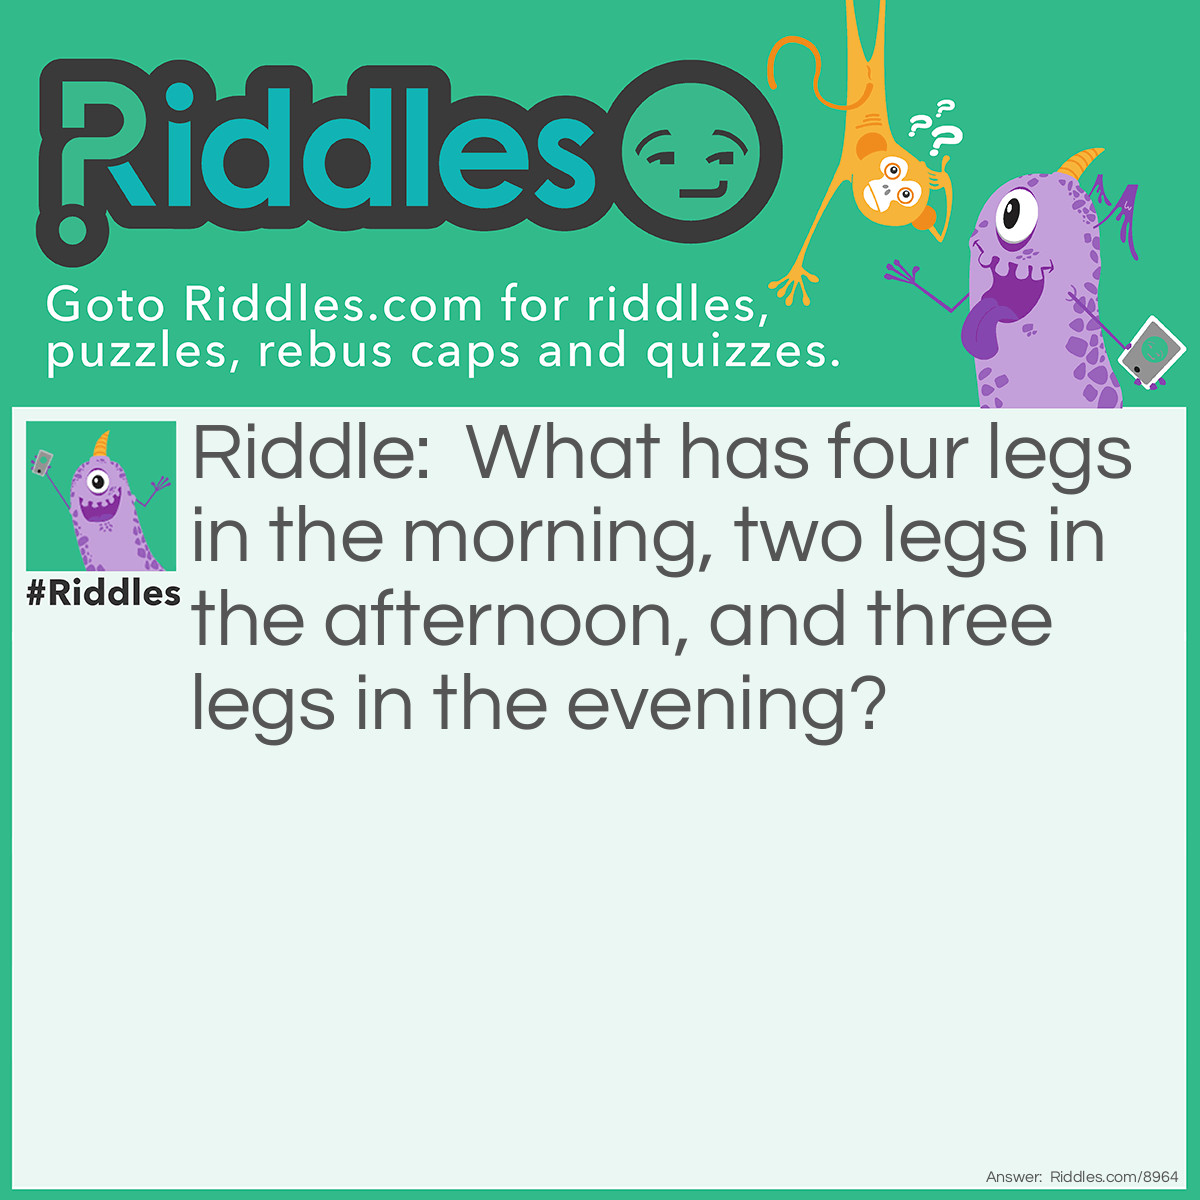 Riddle: What has four legs in the morning, two legs in the afternoon, and three legs in the evening? Answer: A human being. In the beginning of it’s life, it is a baby, and crawls on four legs. In the middle of it’s life, it is a adult, child, preteen, teen, or young adult, and walks on two legs. In the end of it’s life, it is a old human being, and might need a cane to walk, so it has three legs.